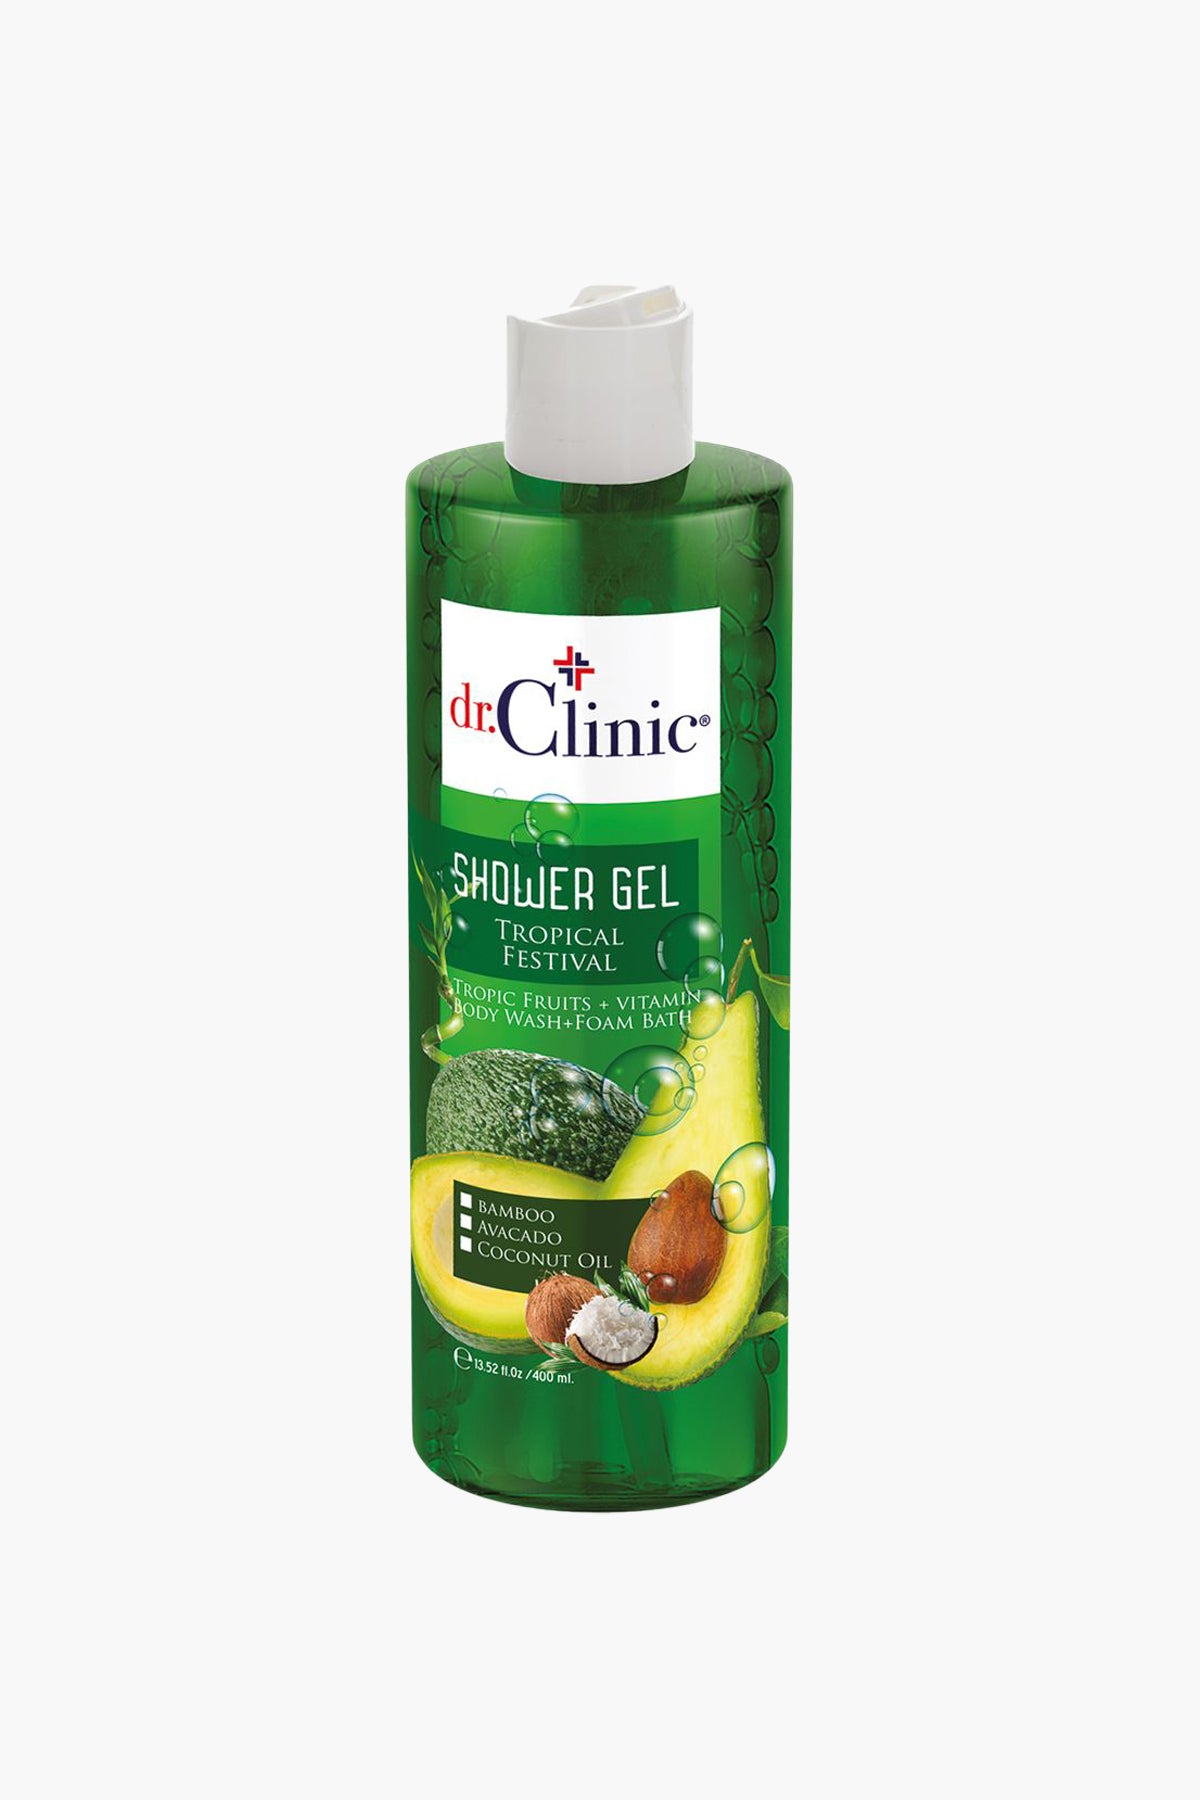 Load image into Gallery viewer, Shower Gel - Tropical Festival 400 ml - Dr.Clinic
